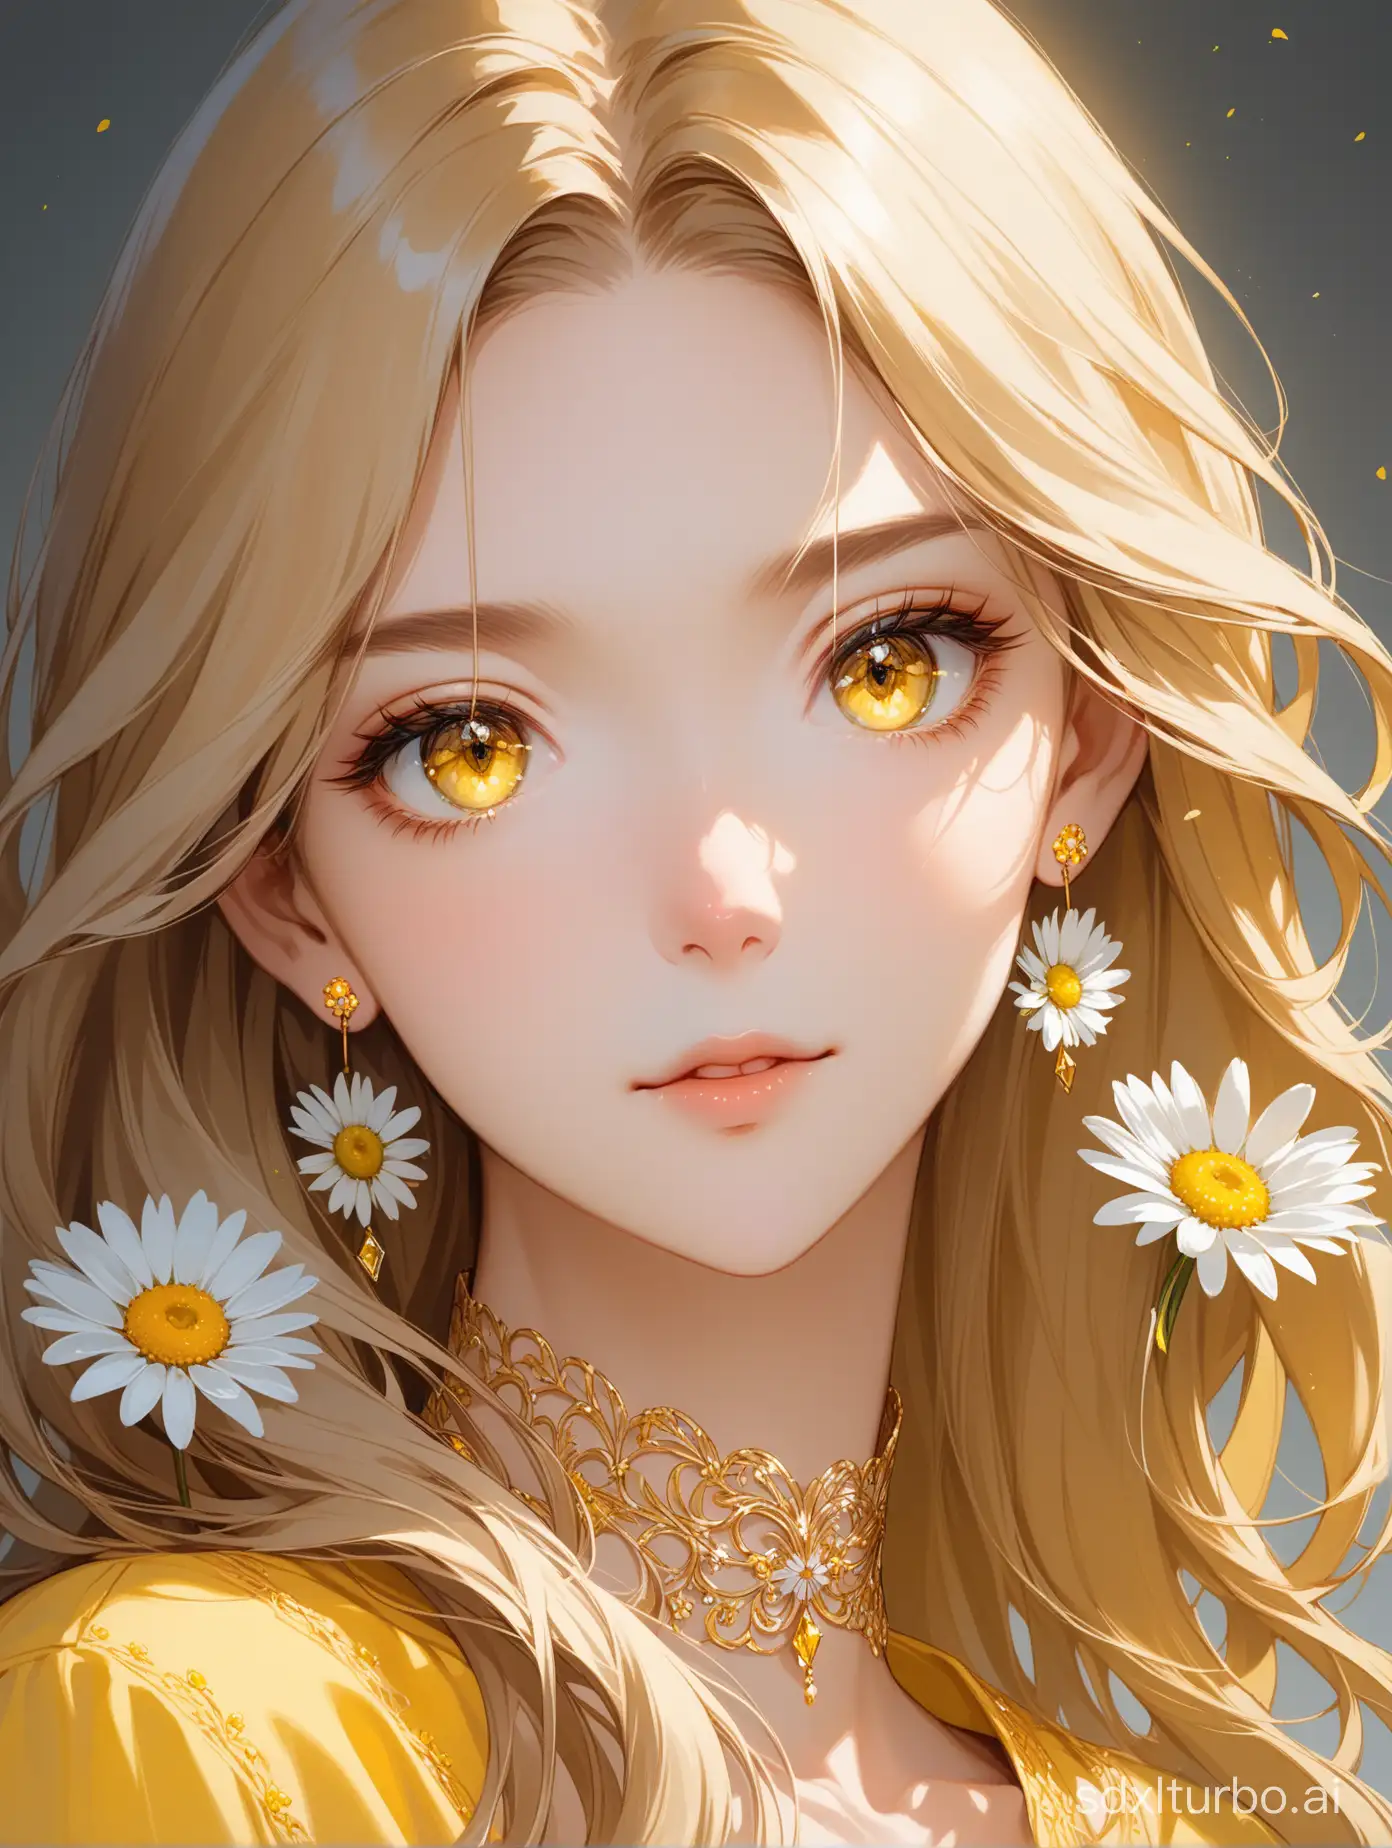 Exquisite-Solo-Portrait-of-a-Girl-with-Yellow-Earrings-and-Daisies